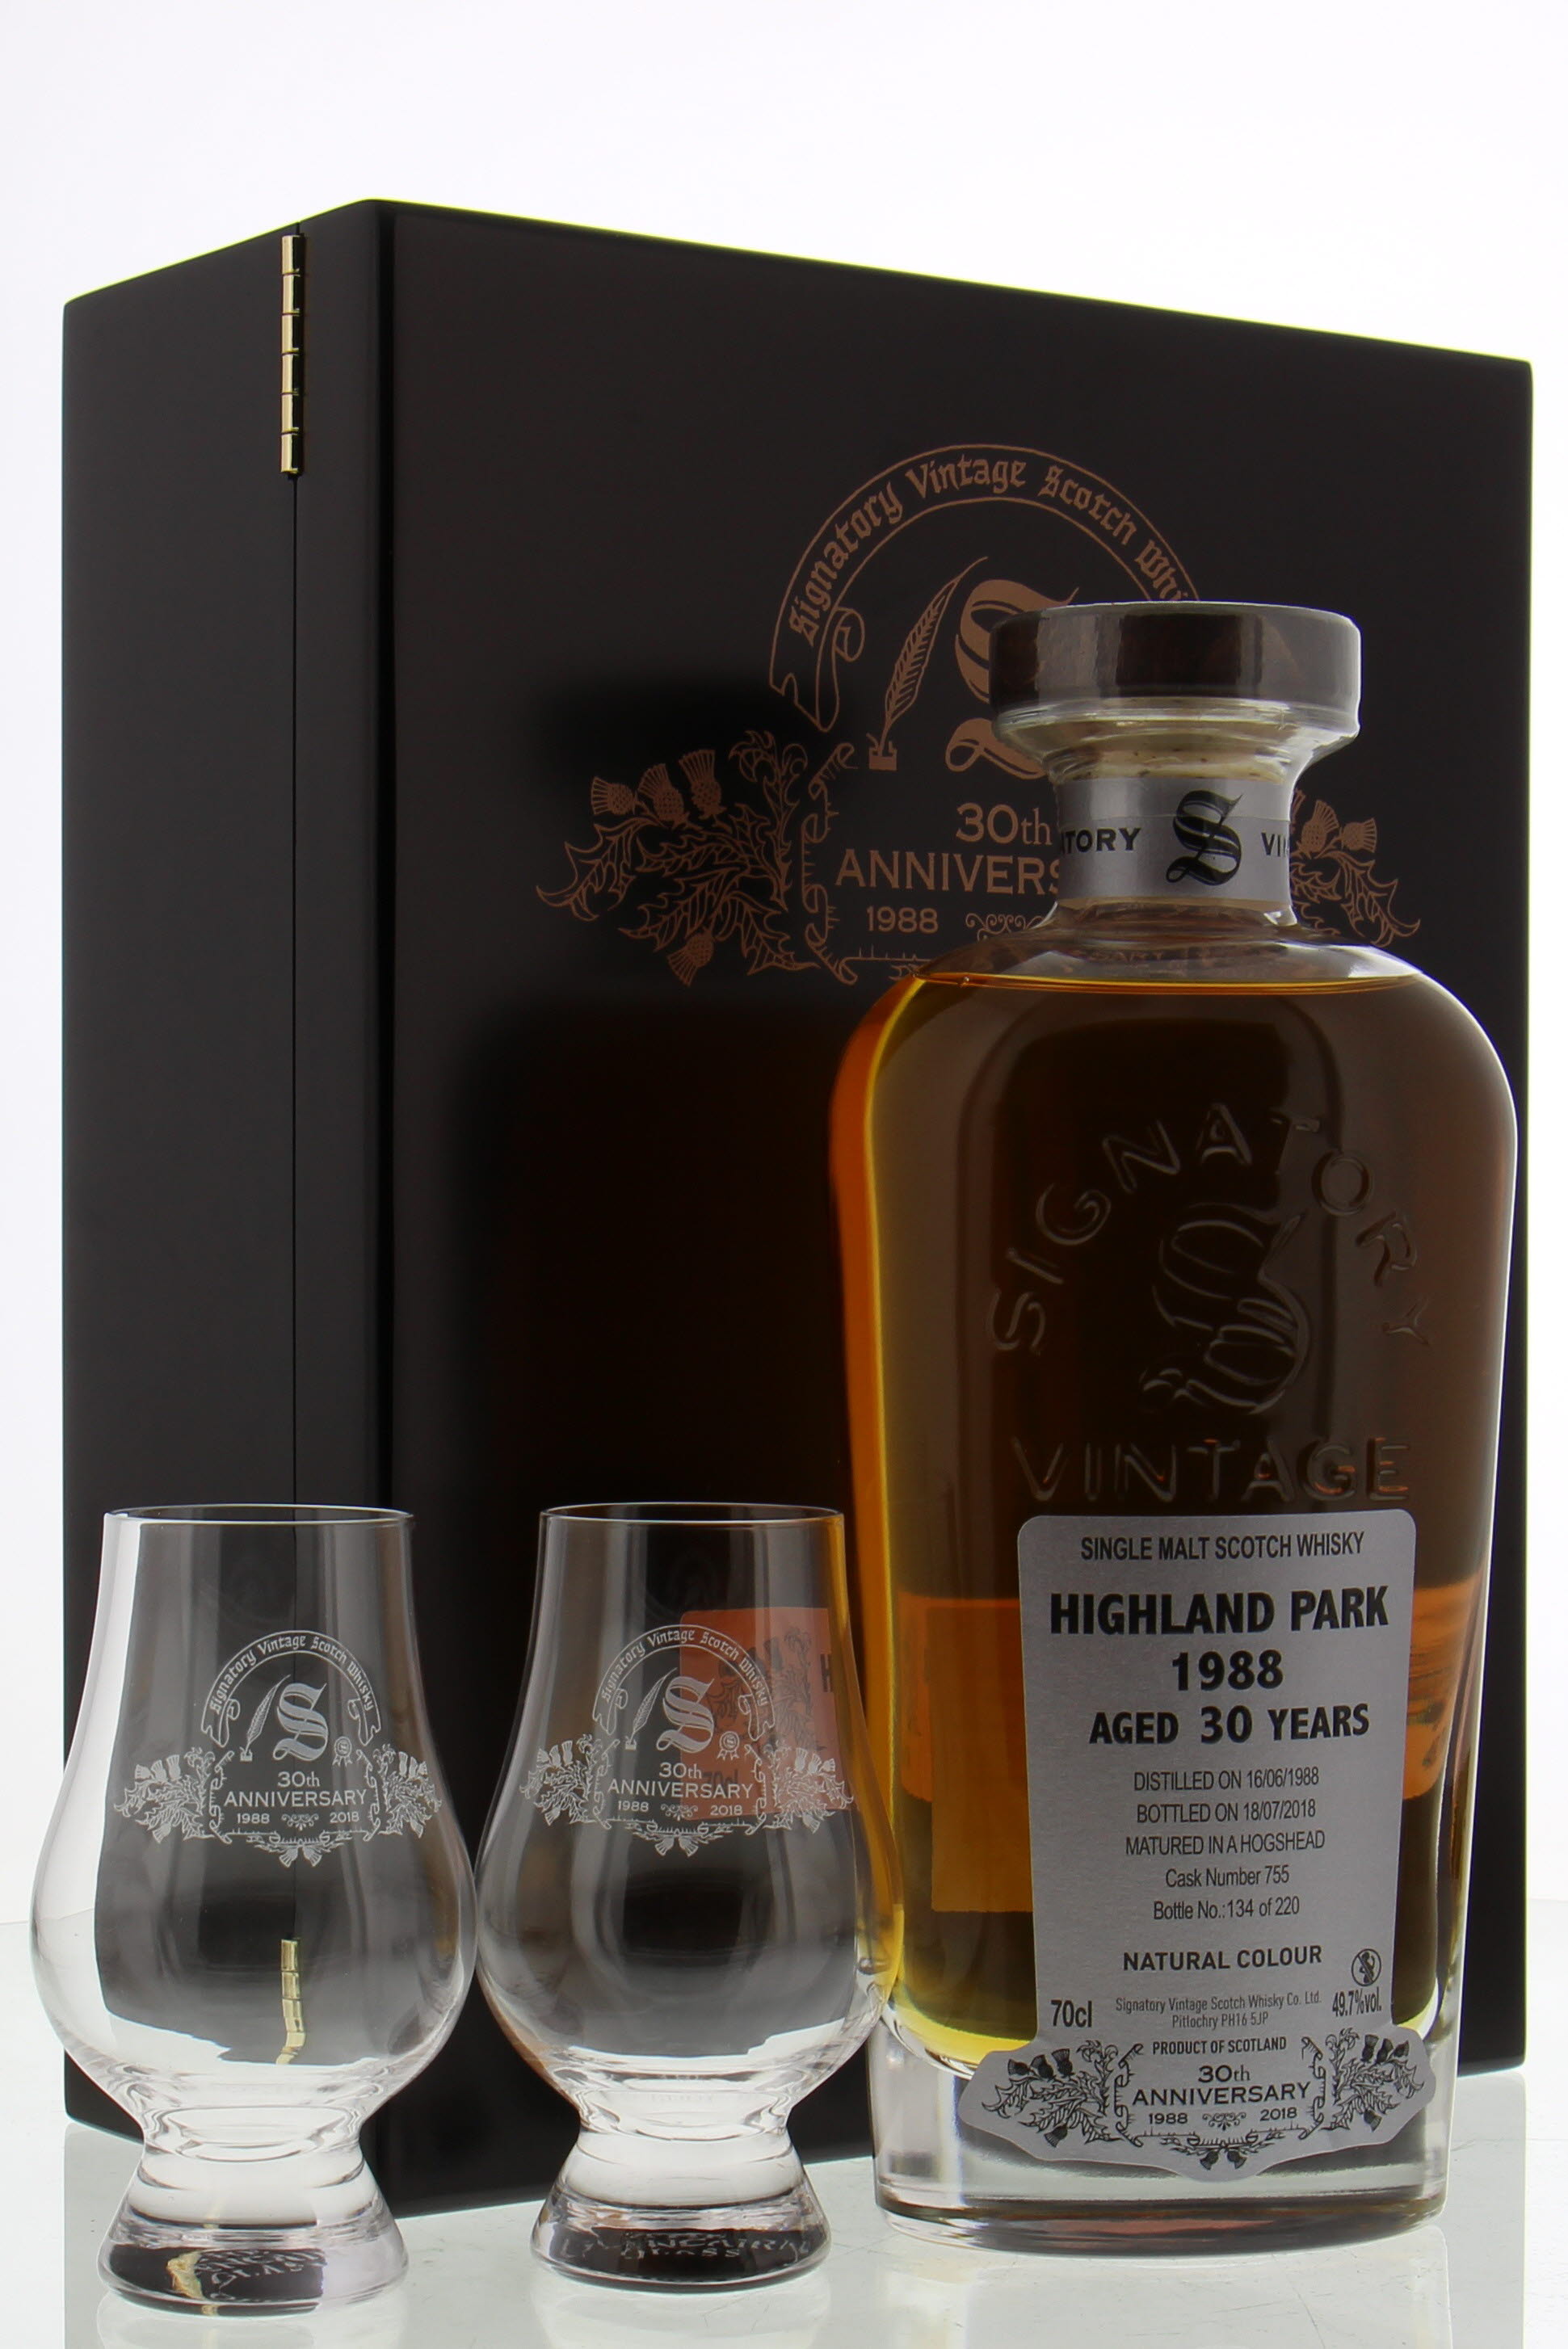 Highland Park - 30 Years Old Signatory 30th Anniversary Cask 755 49.7% 1988